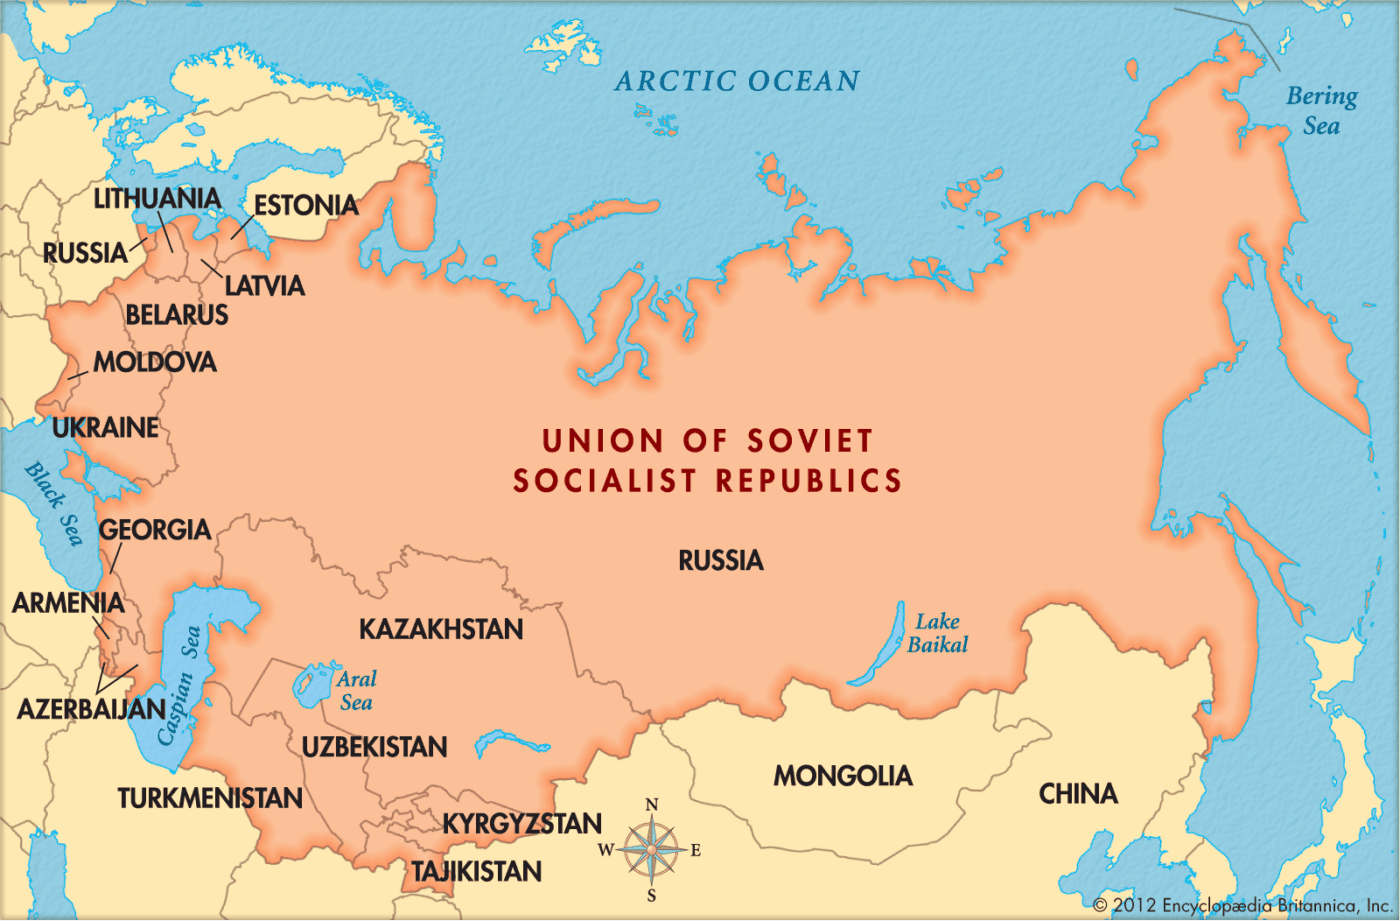 USSR-map-by-Encyclopedia-Britannica-1400x921, Money, money, money: The real deal behind Putin's invasion of Ukraine, Abolition Now! News & Views World News & Views 